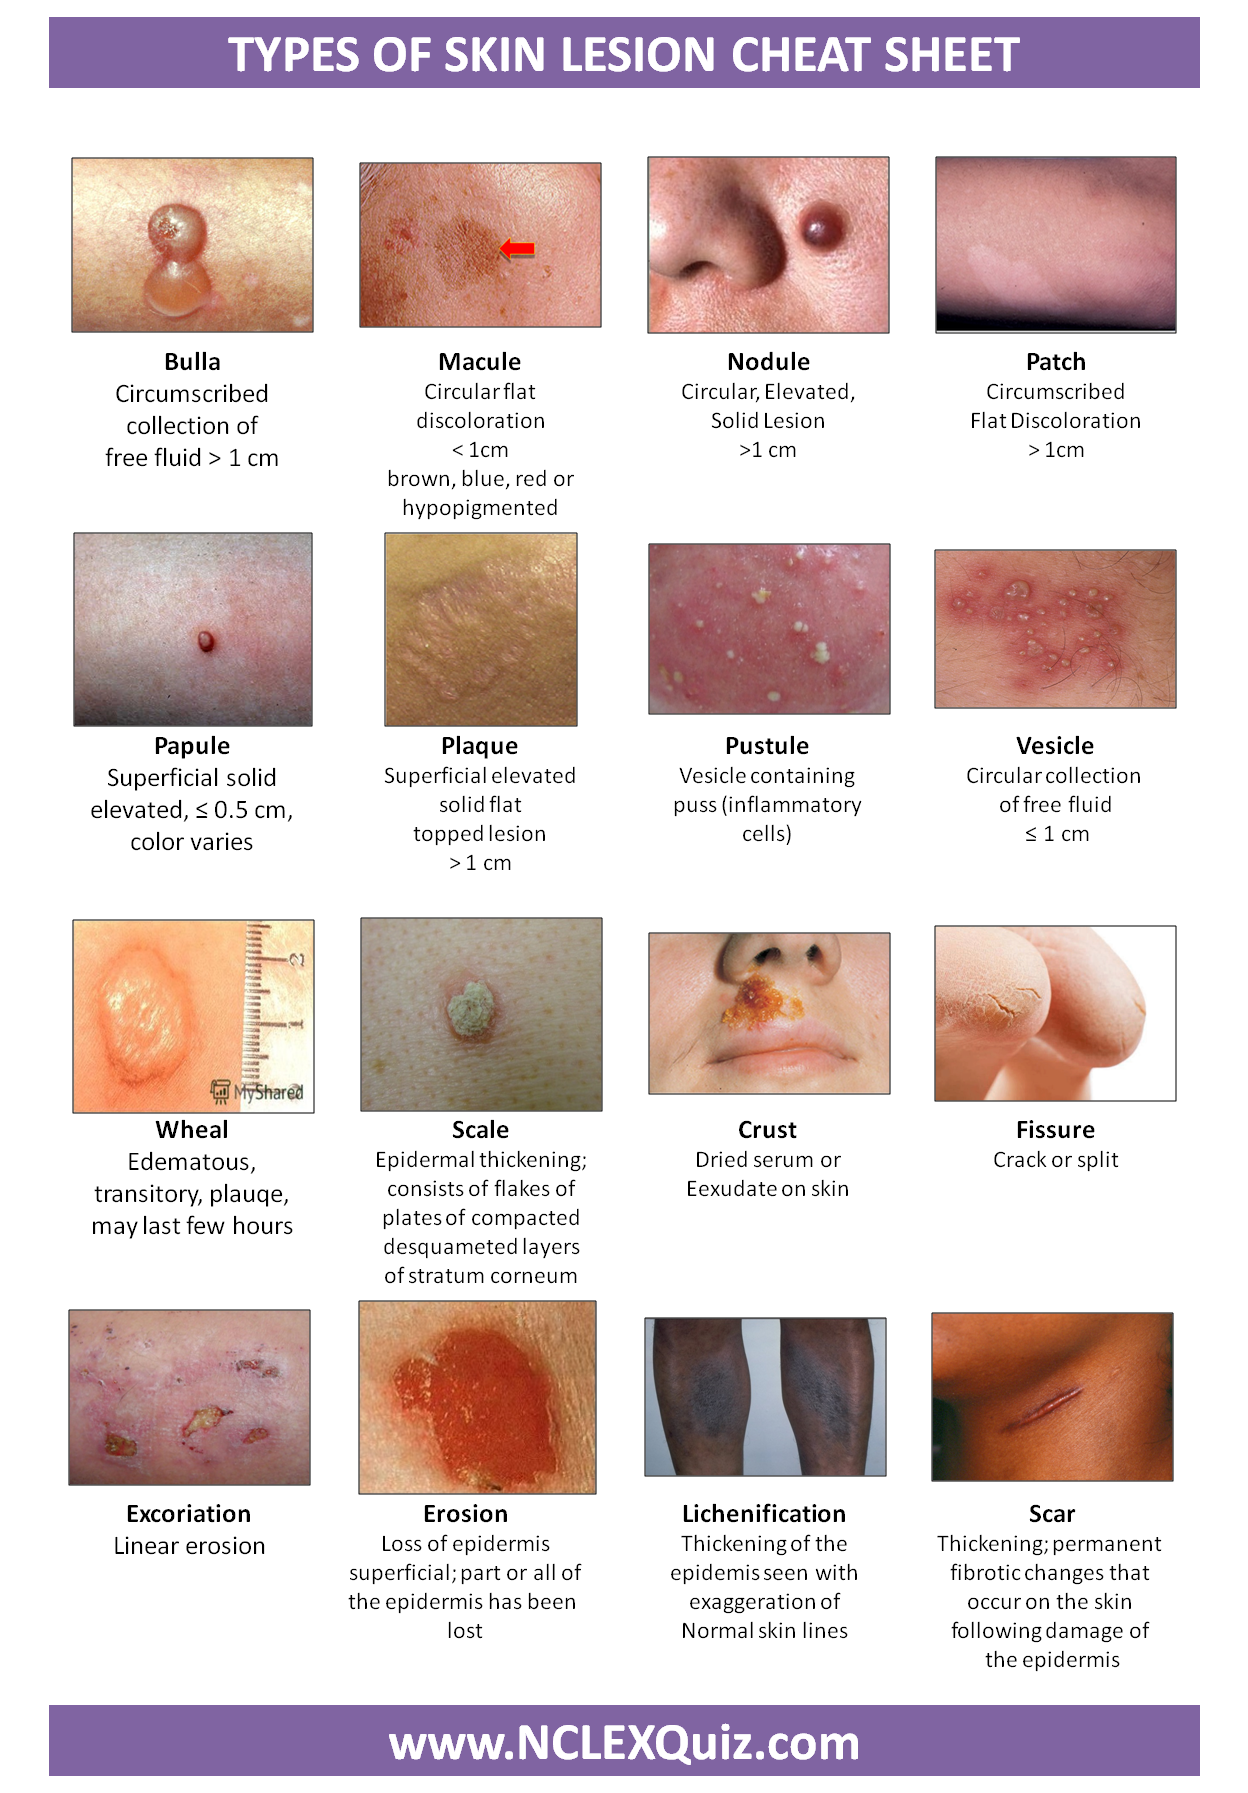 Types Of Skin Lesions Chart